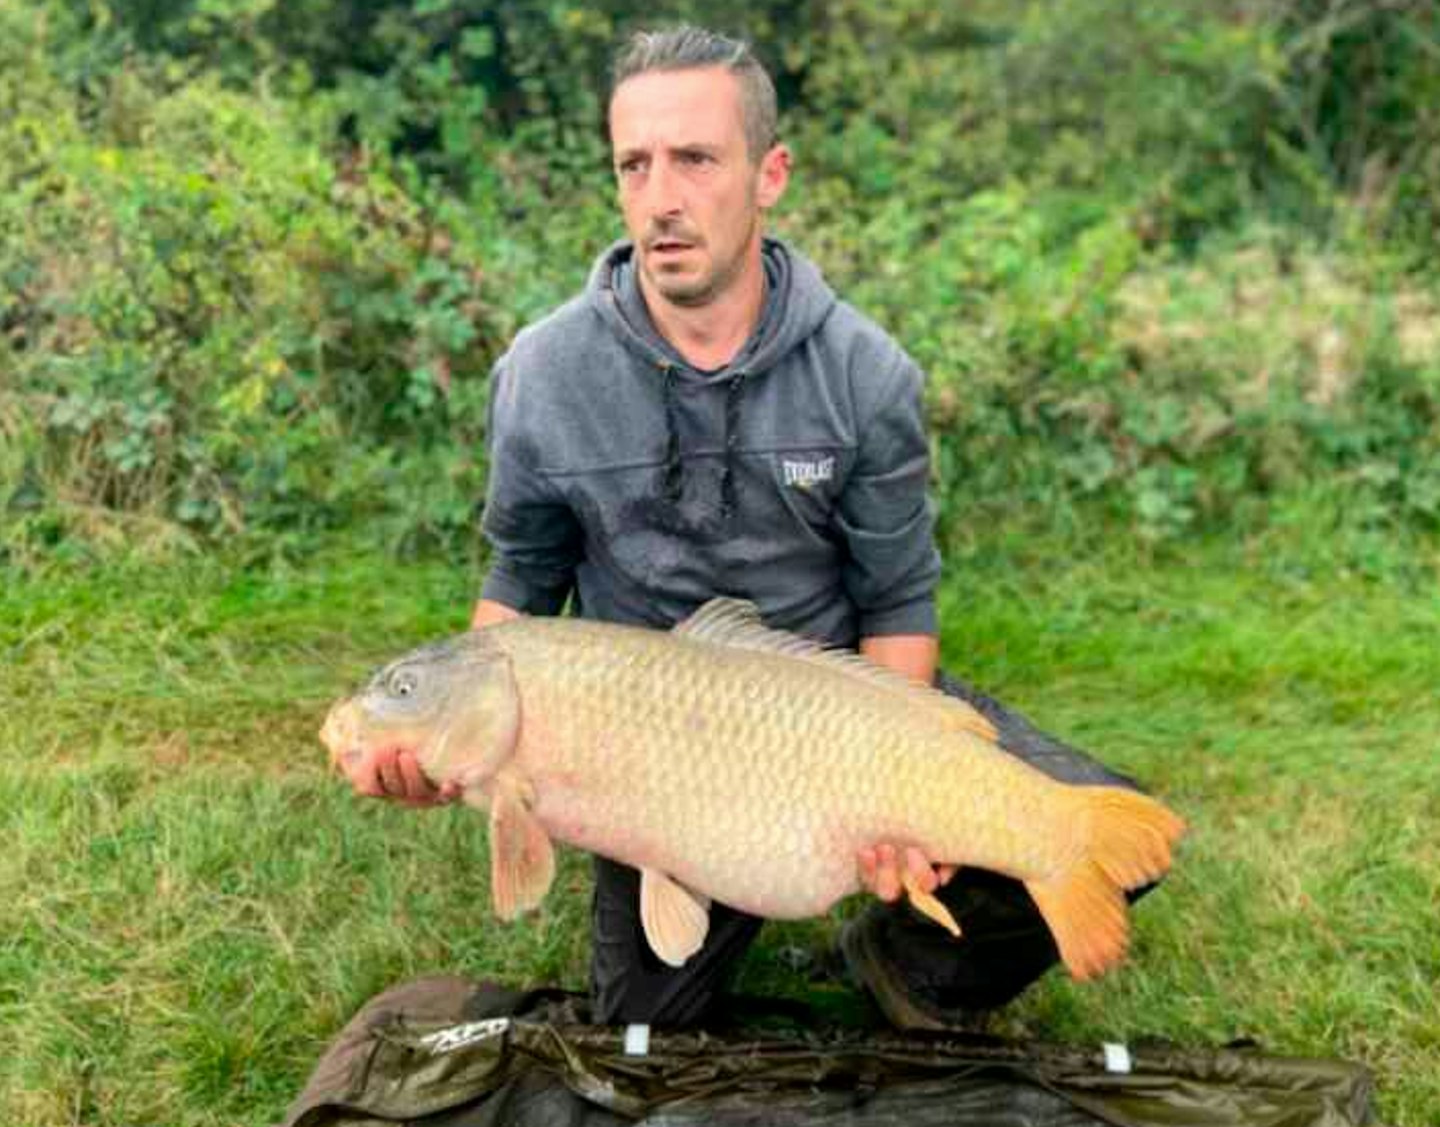 Wayne Means and his 40lb carp on the pole